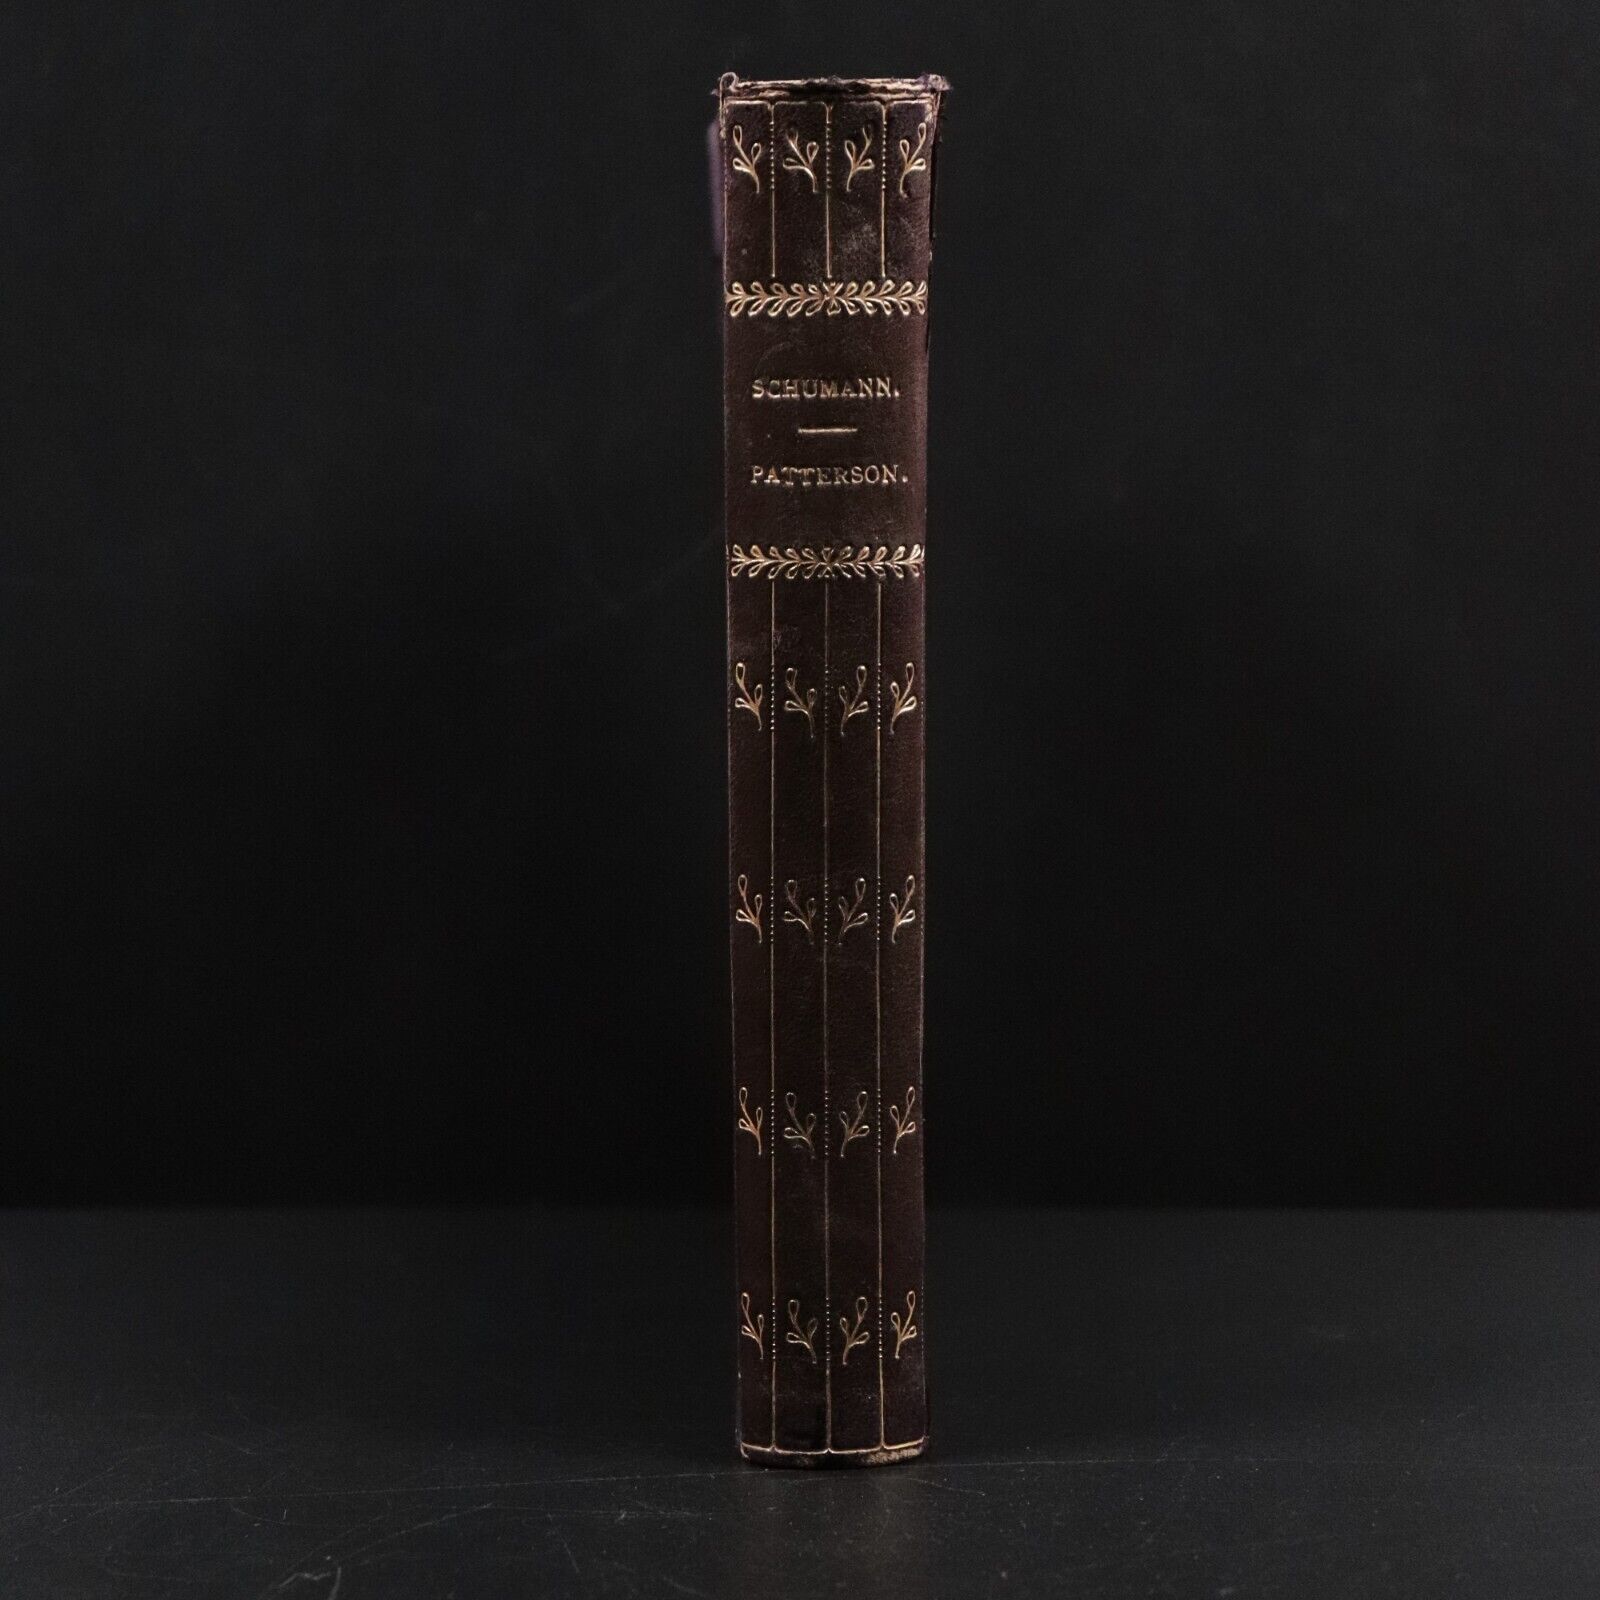 1908 Schumann by Annie W. Patterson Antique Classical Music History Book